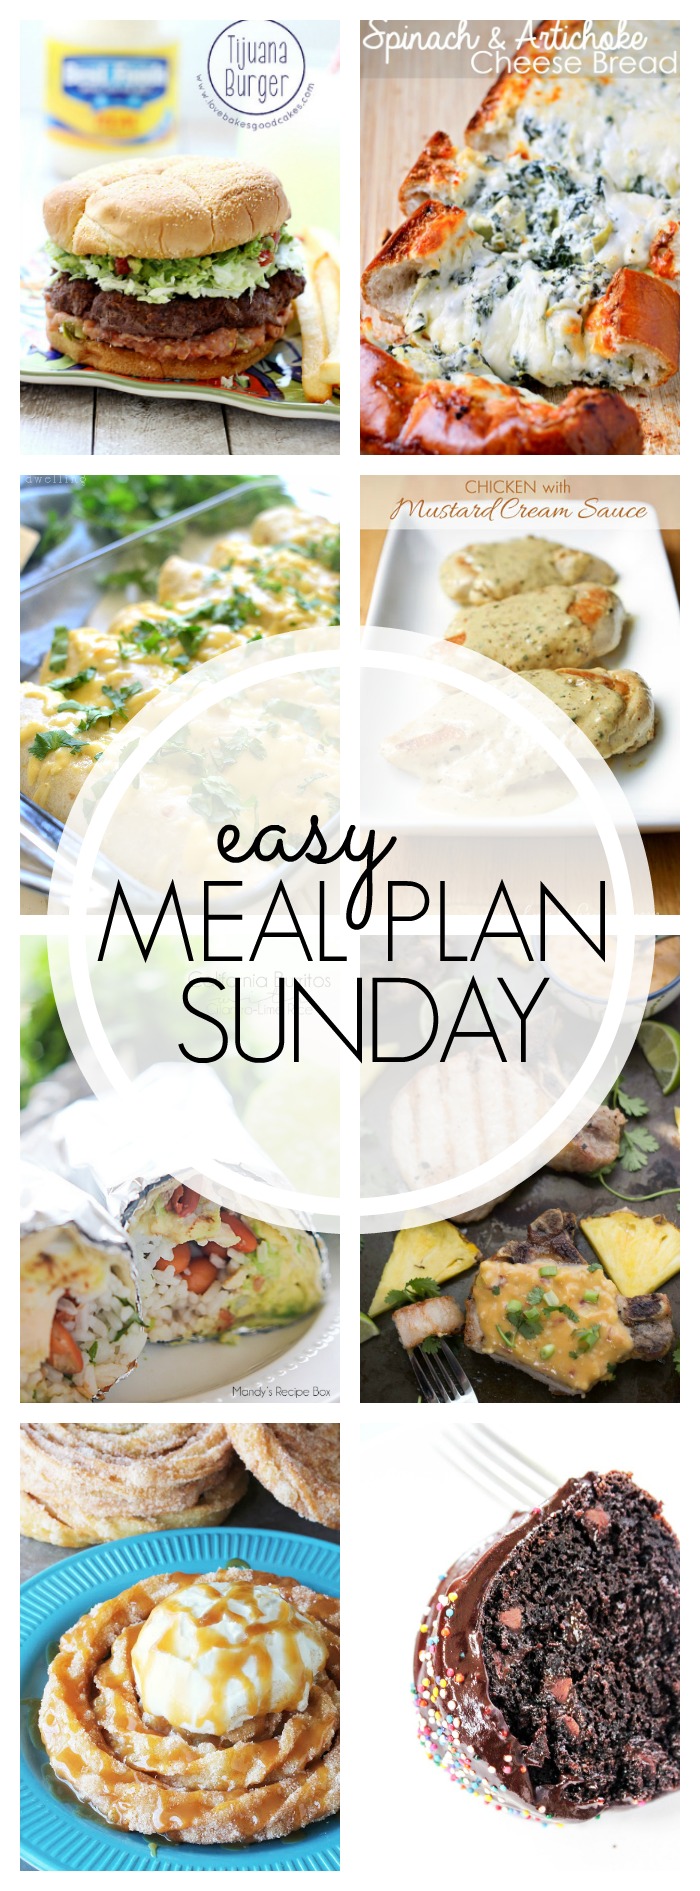 Easy Meal Plan Sunday #48